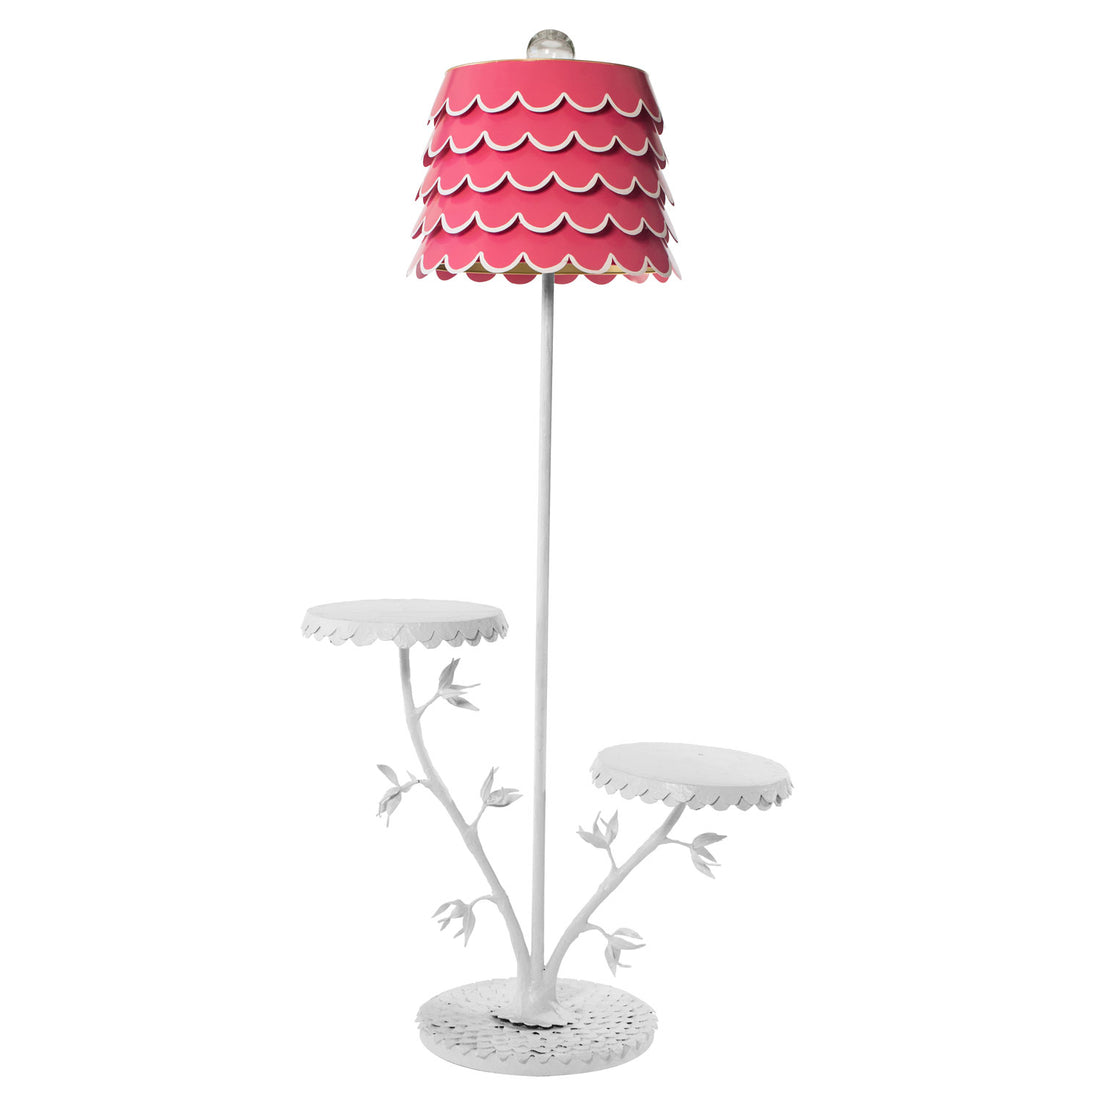 Dahlia Cluster Floor Lamp with tables and tole shade in pink and white